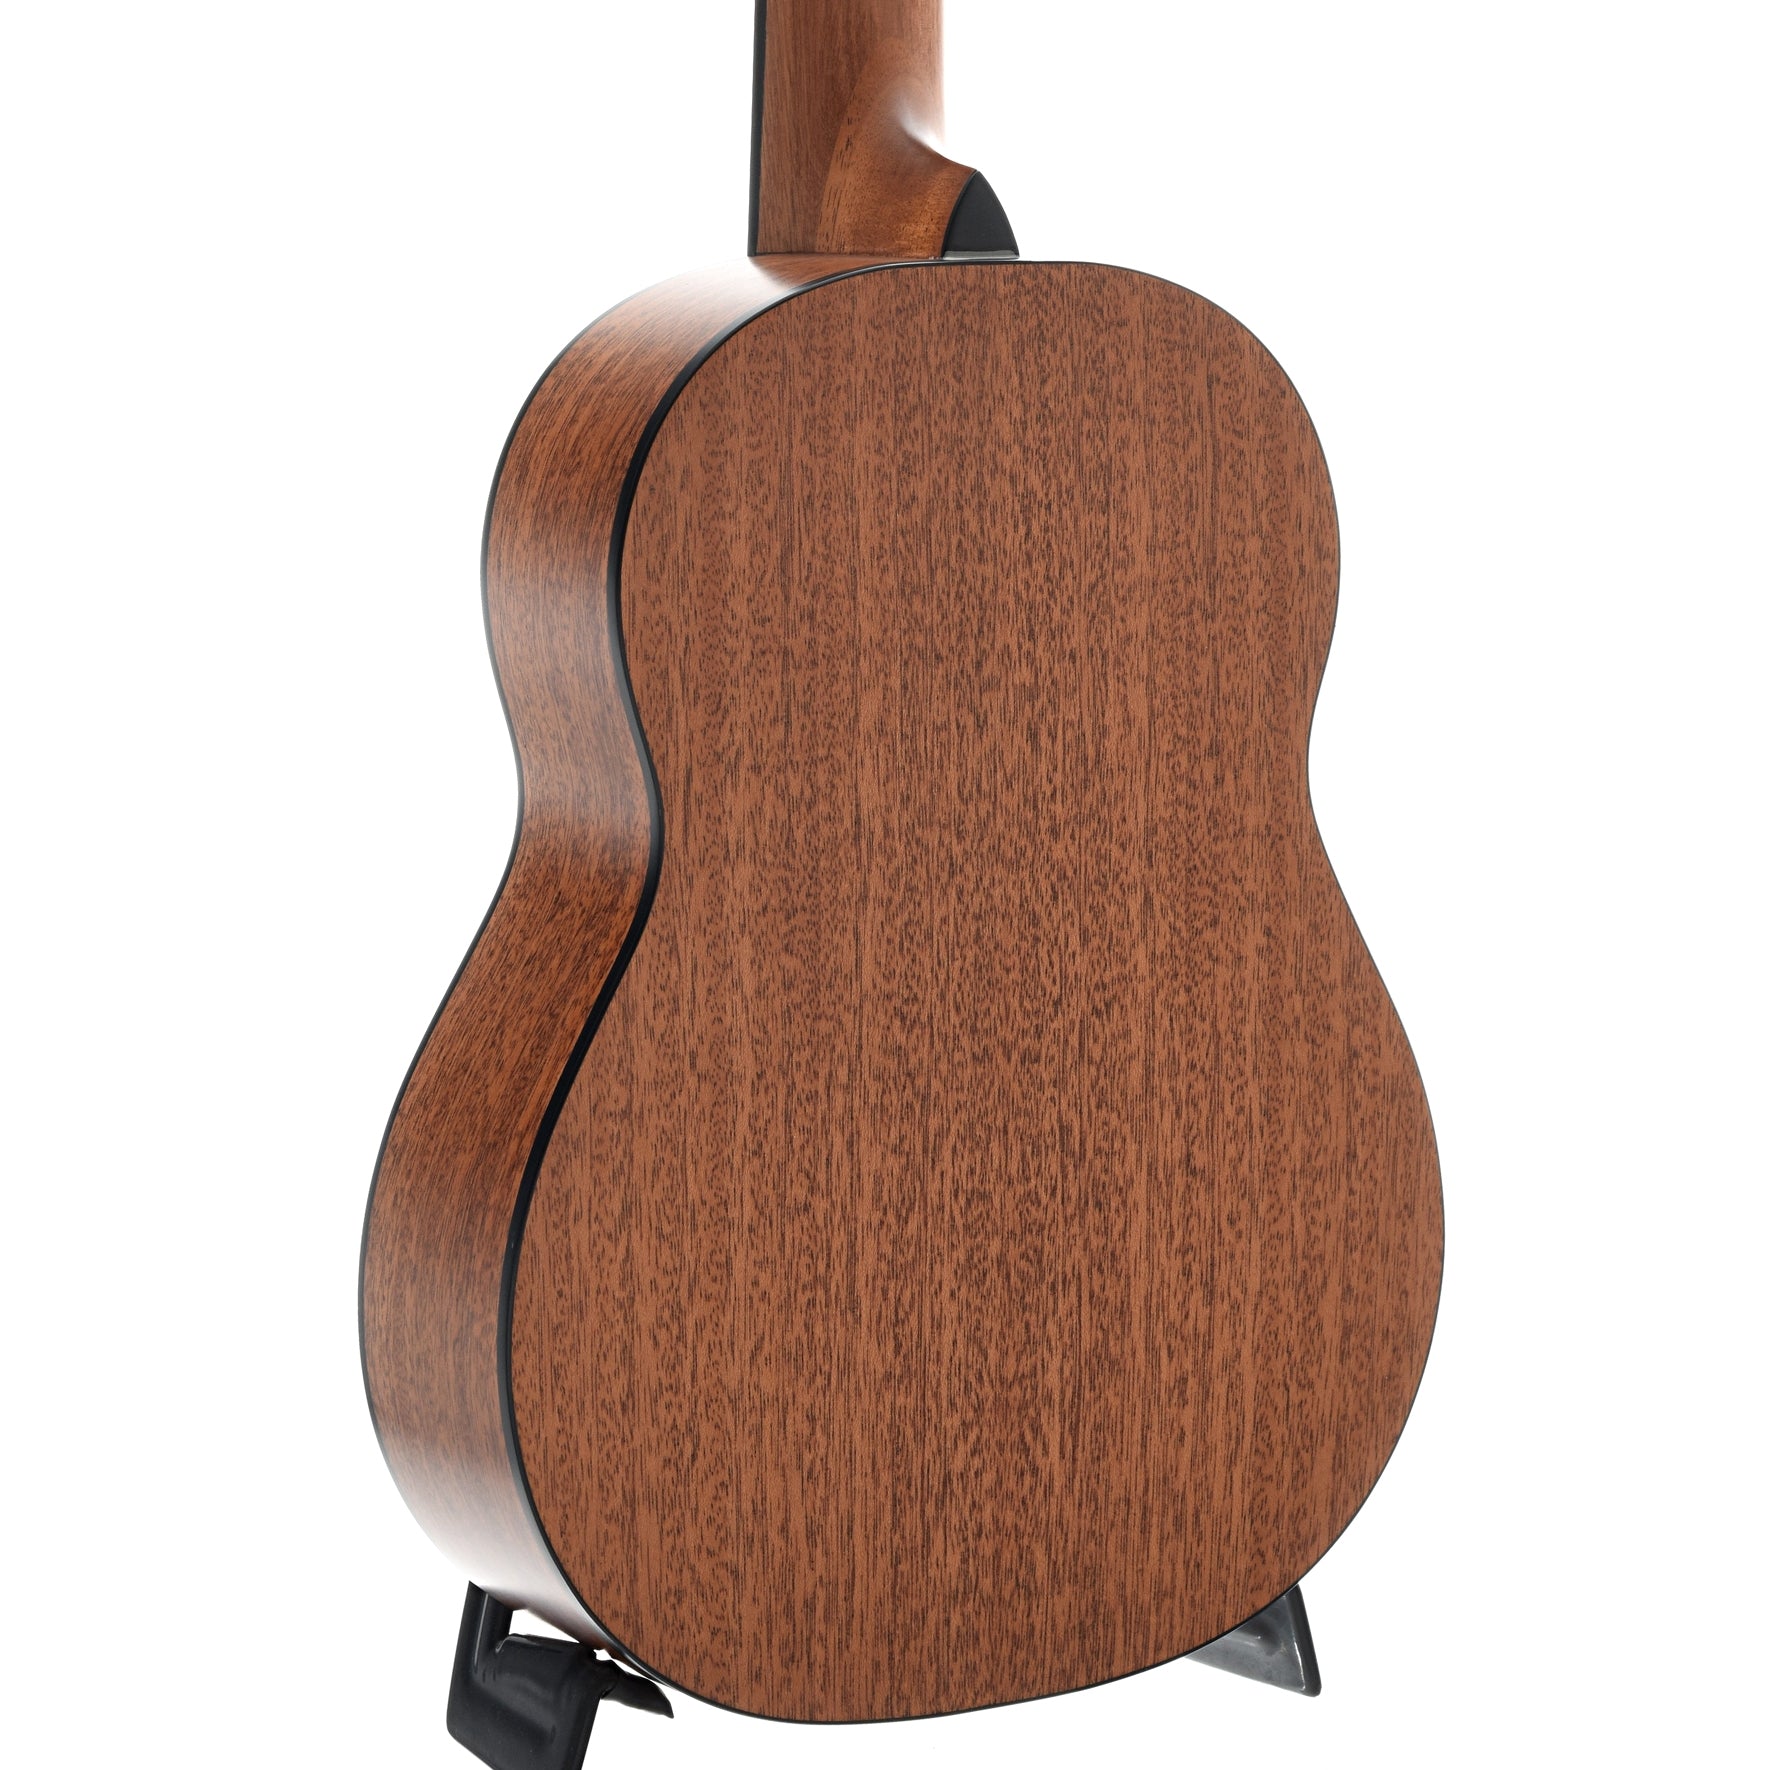 Image 9 of Romero Creations Pepe Romero, SR. Signature Model, Solid Spruce and Mahogany, with Case - SKU# RPR6SM : Product Type Classical & Flamenco Guitars : Elderly Instruments